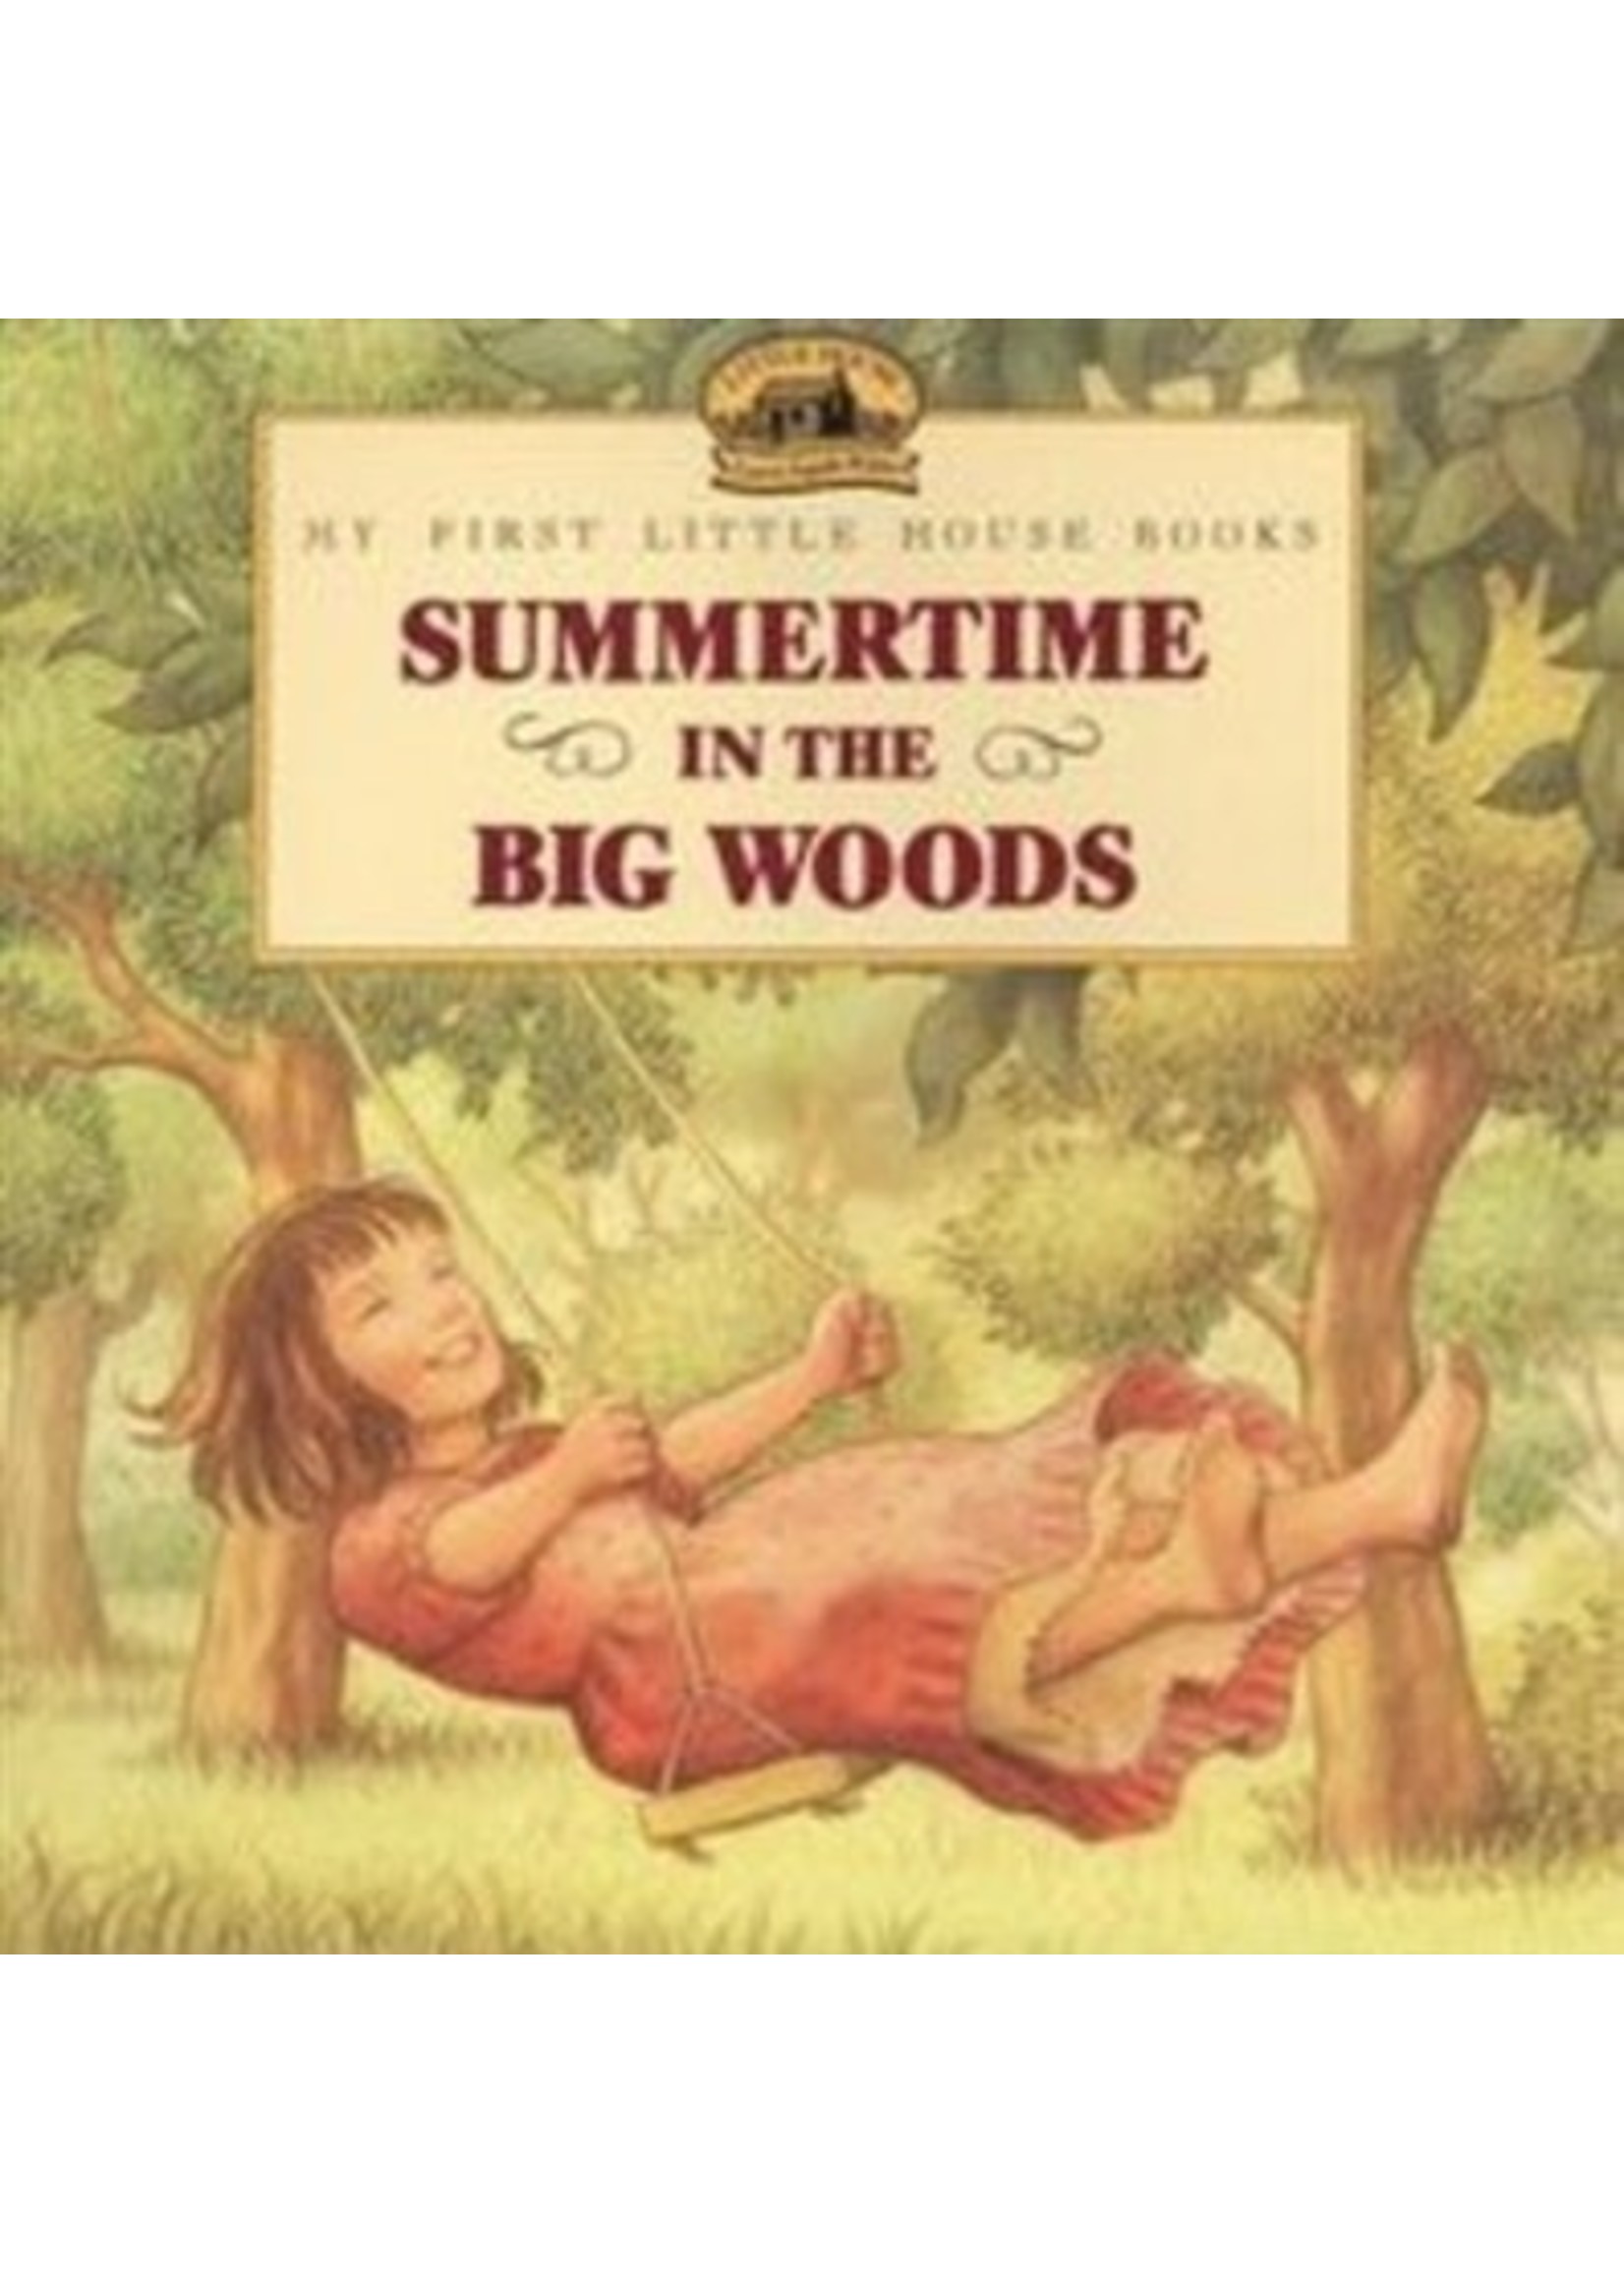 My First Little House Book: Summertime in the Big Woods (HB)